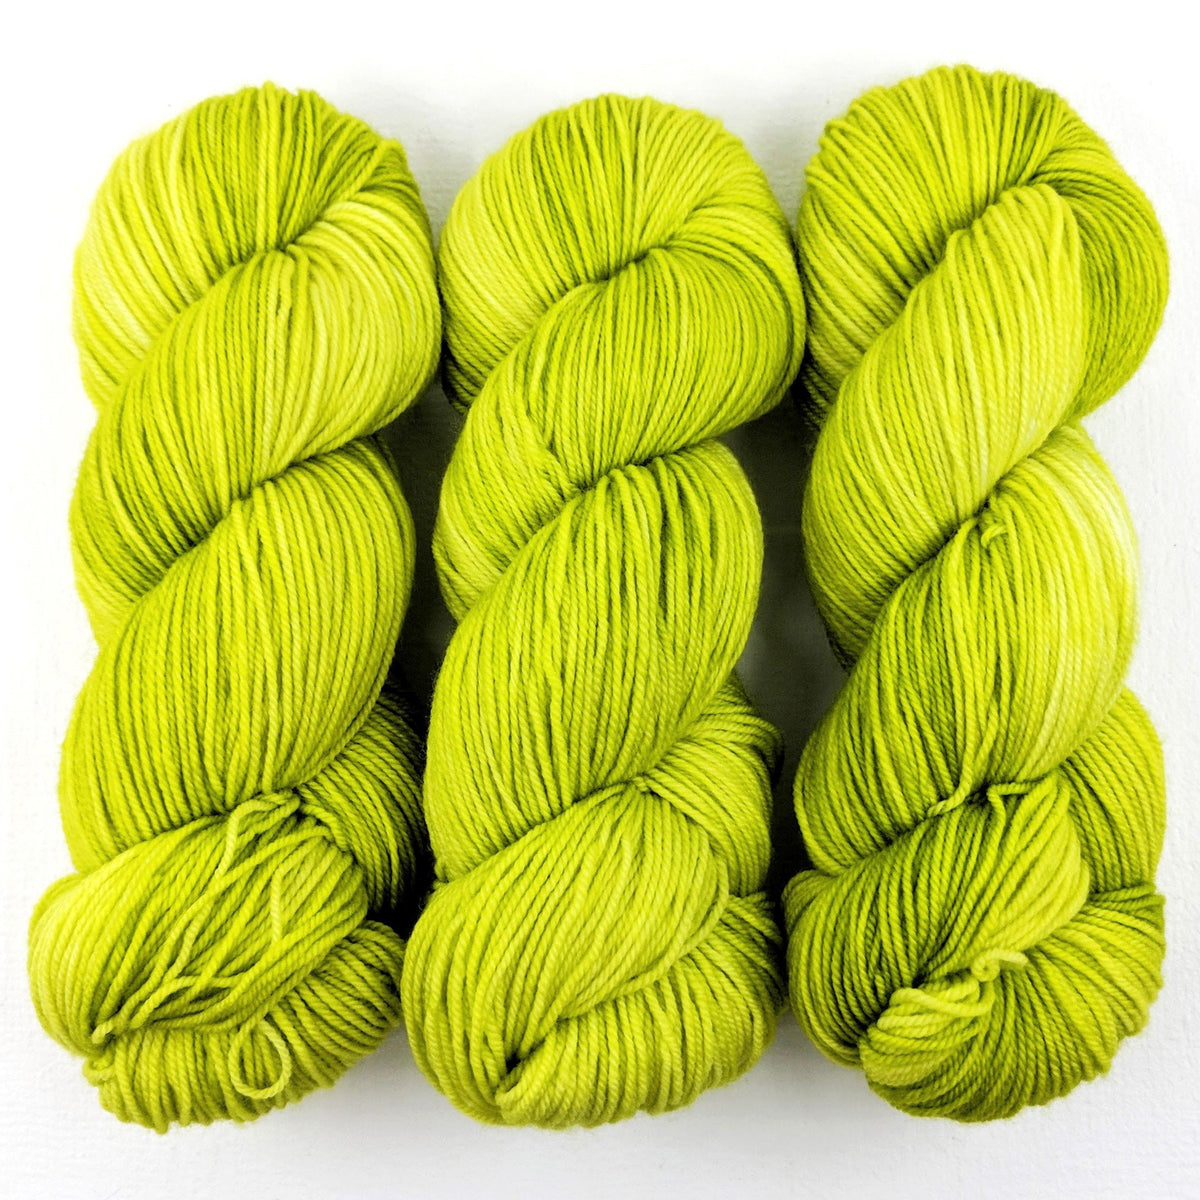 Soda Pop - Revival Worsted - Dyed Stock